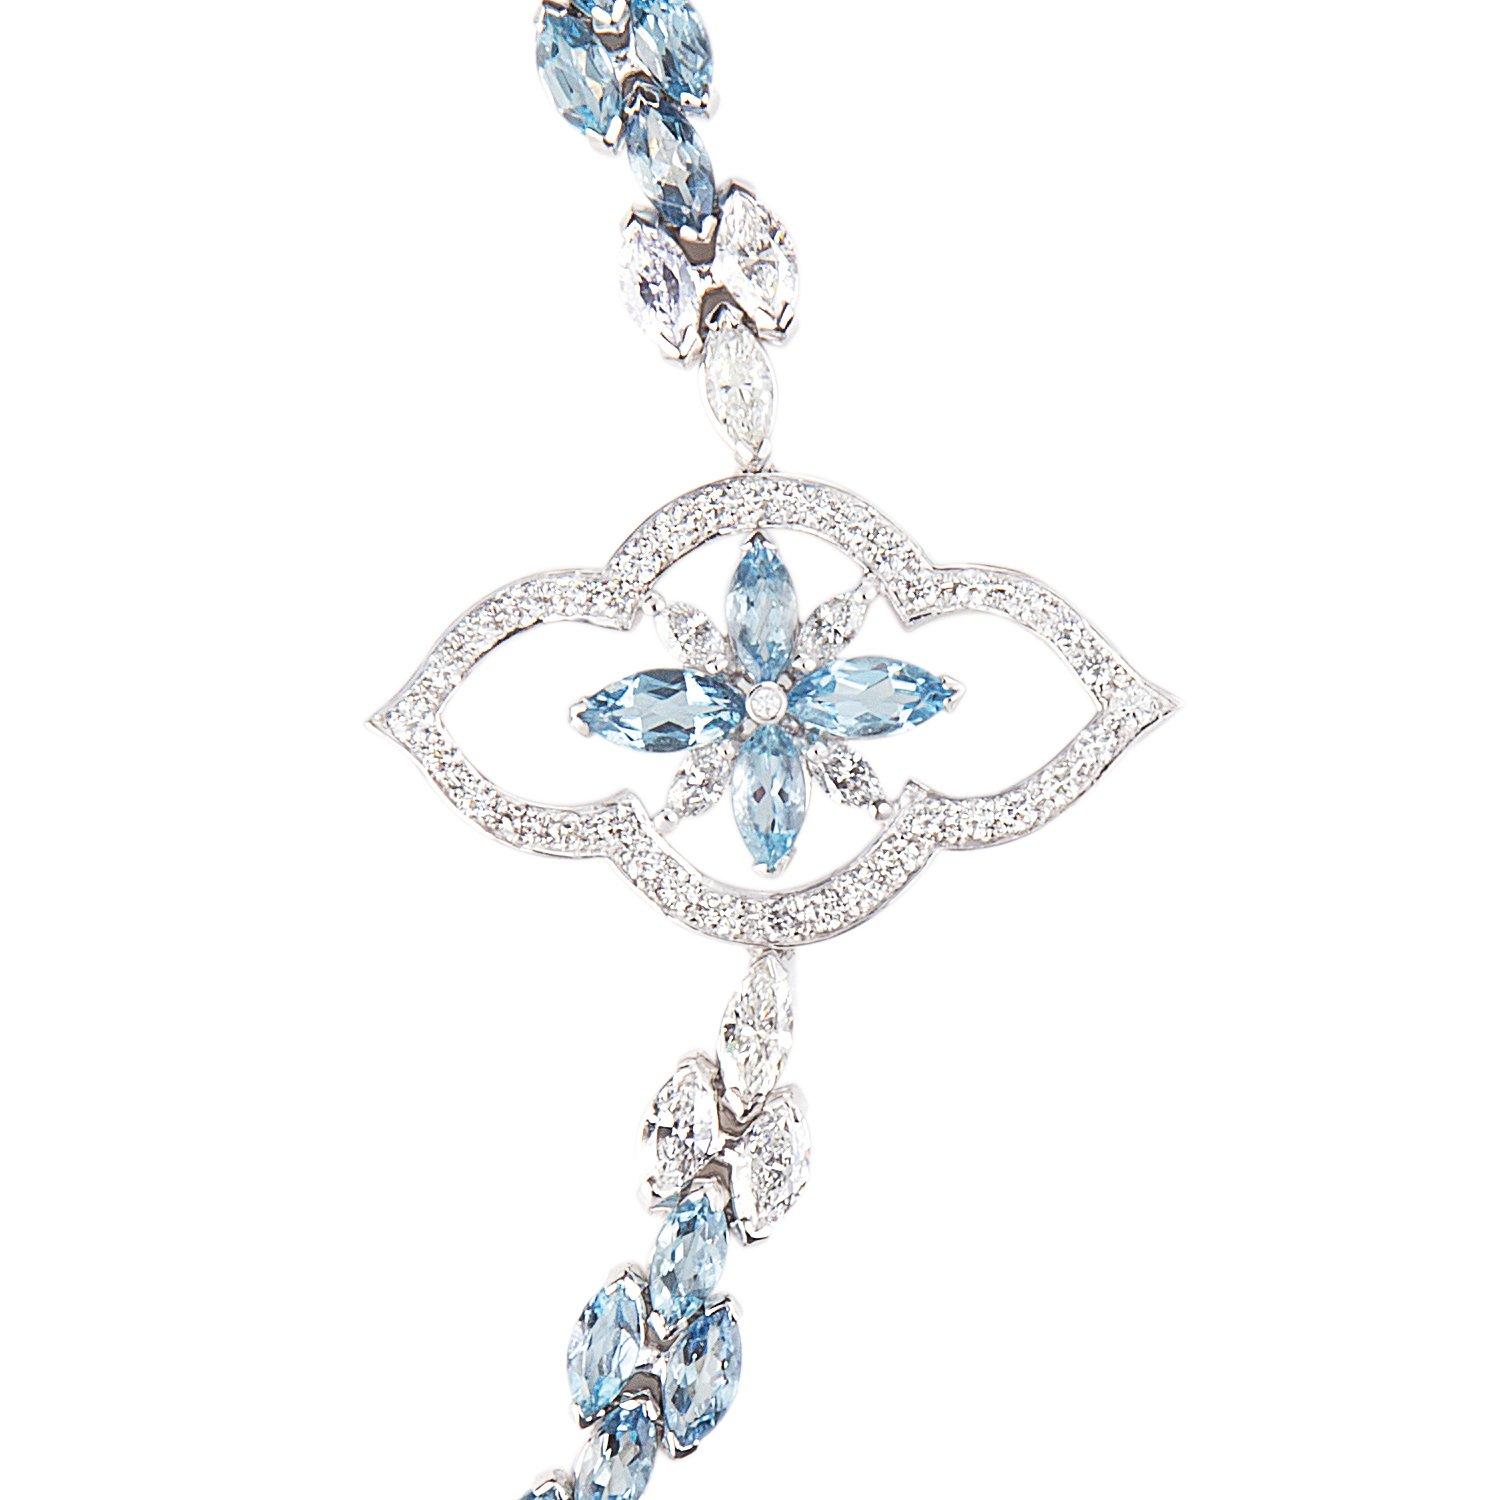 The delicate beauty of a flower, exquisitely suspended upon a sparkling garland which wraps elegantly around the wrist, depicted in marquise cut aquamarines and brilliant cut diamonds.

Details
Stella Aquamarine and Diamond Bracelet
- 18 karat White